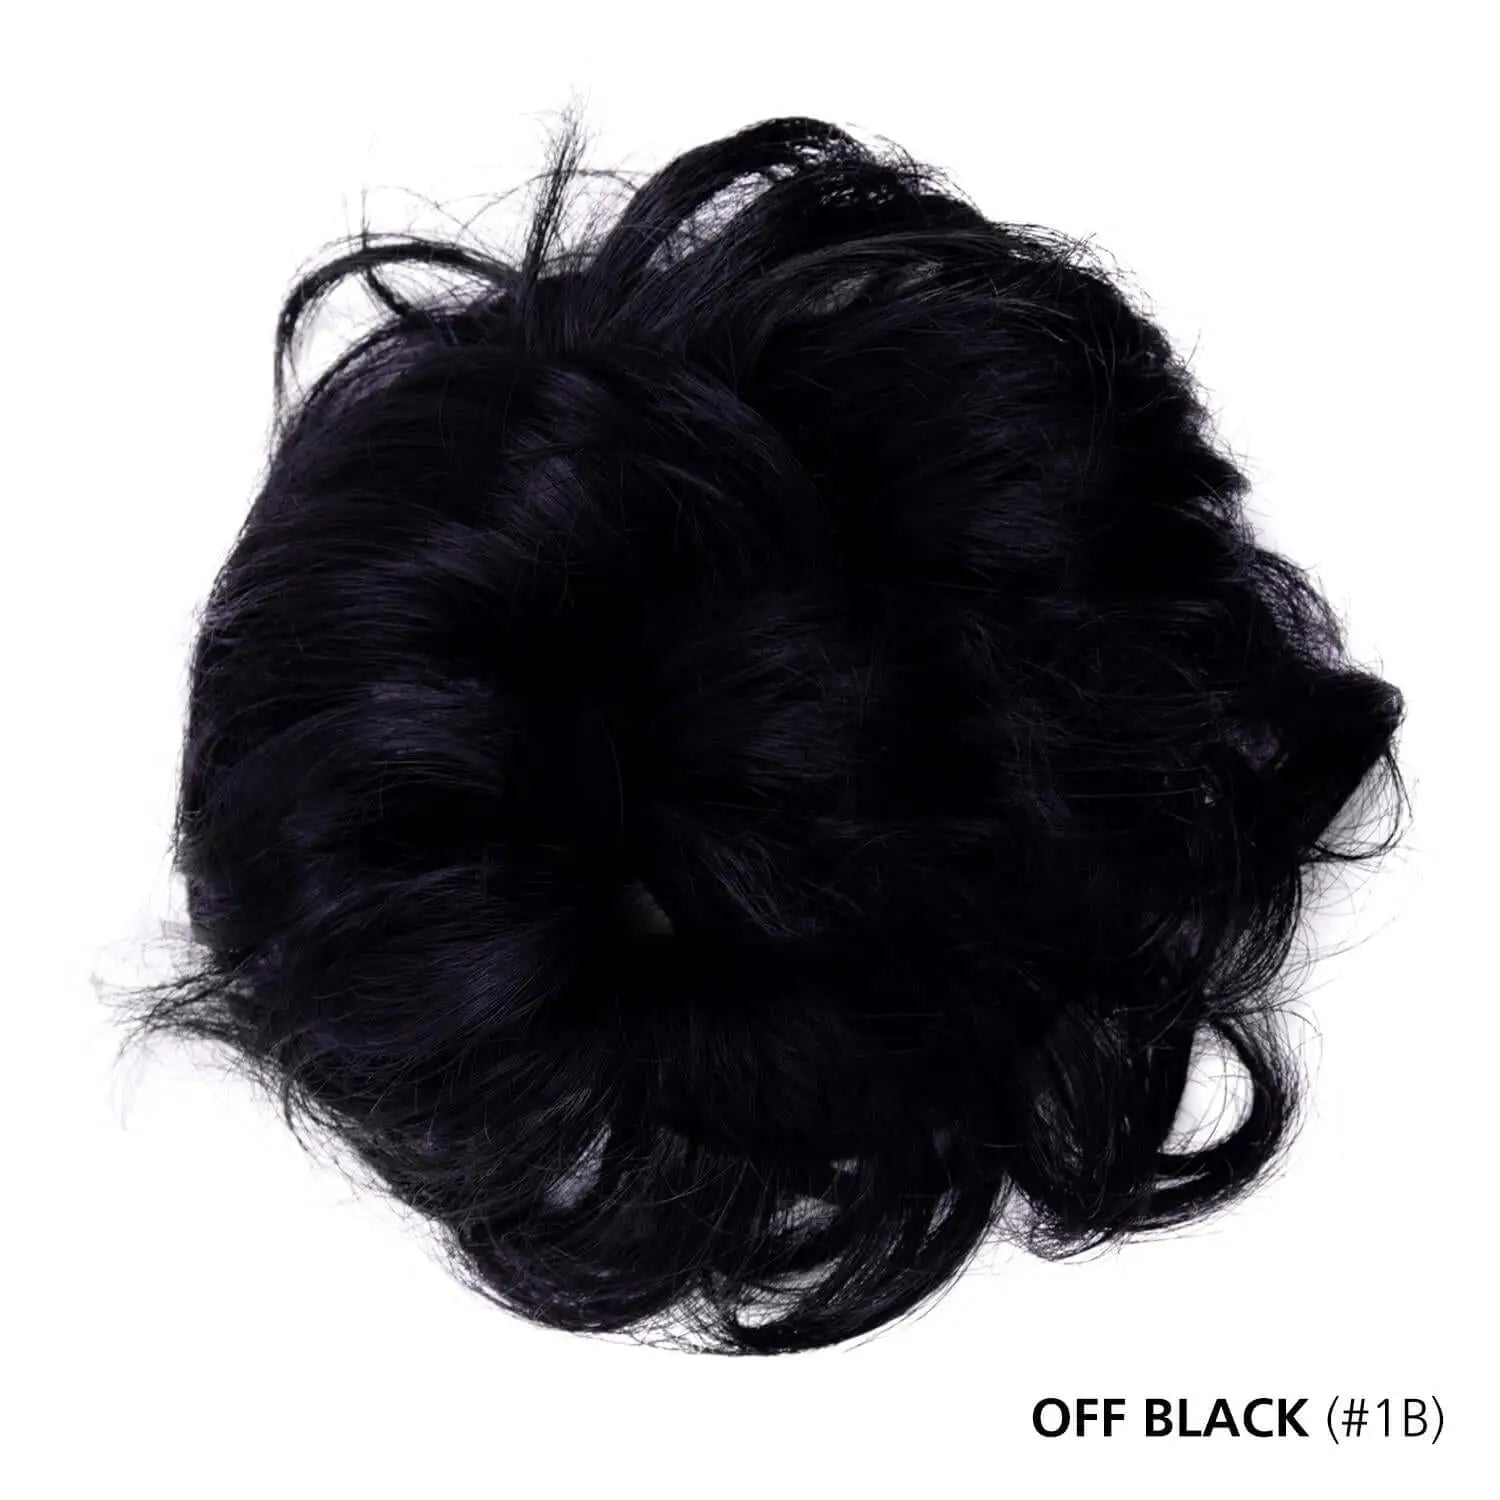 Curly messy bun hair scrunchie extension with black wig and hair piece.